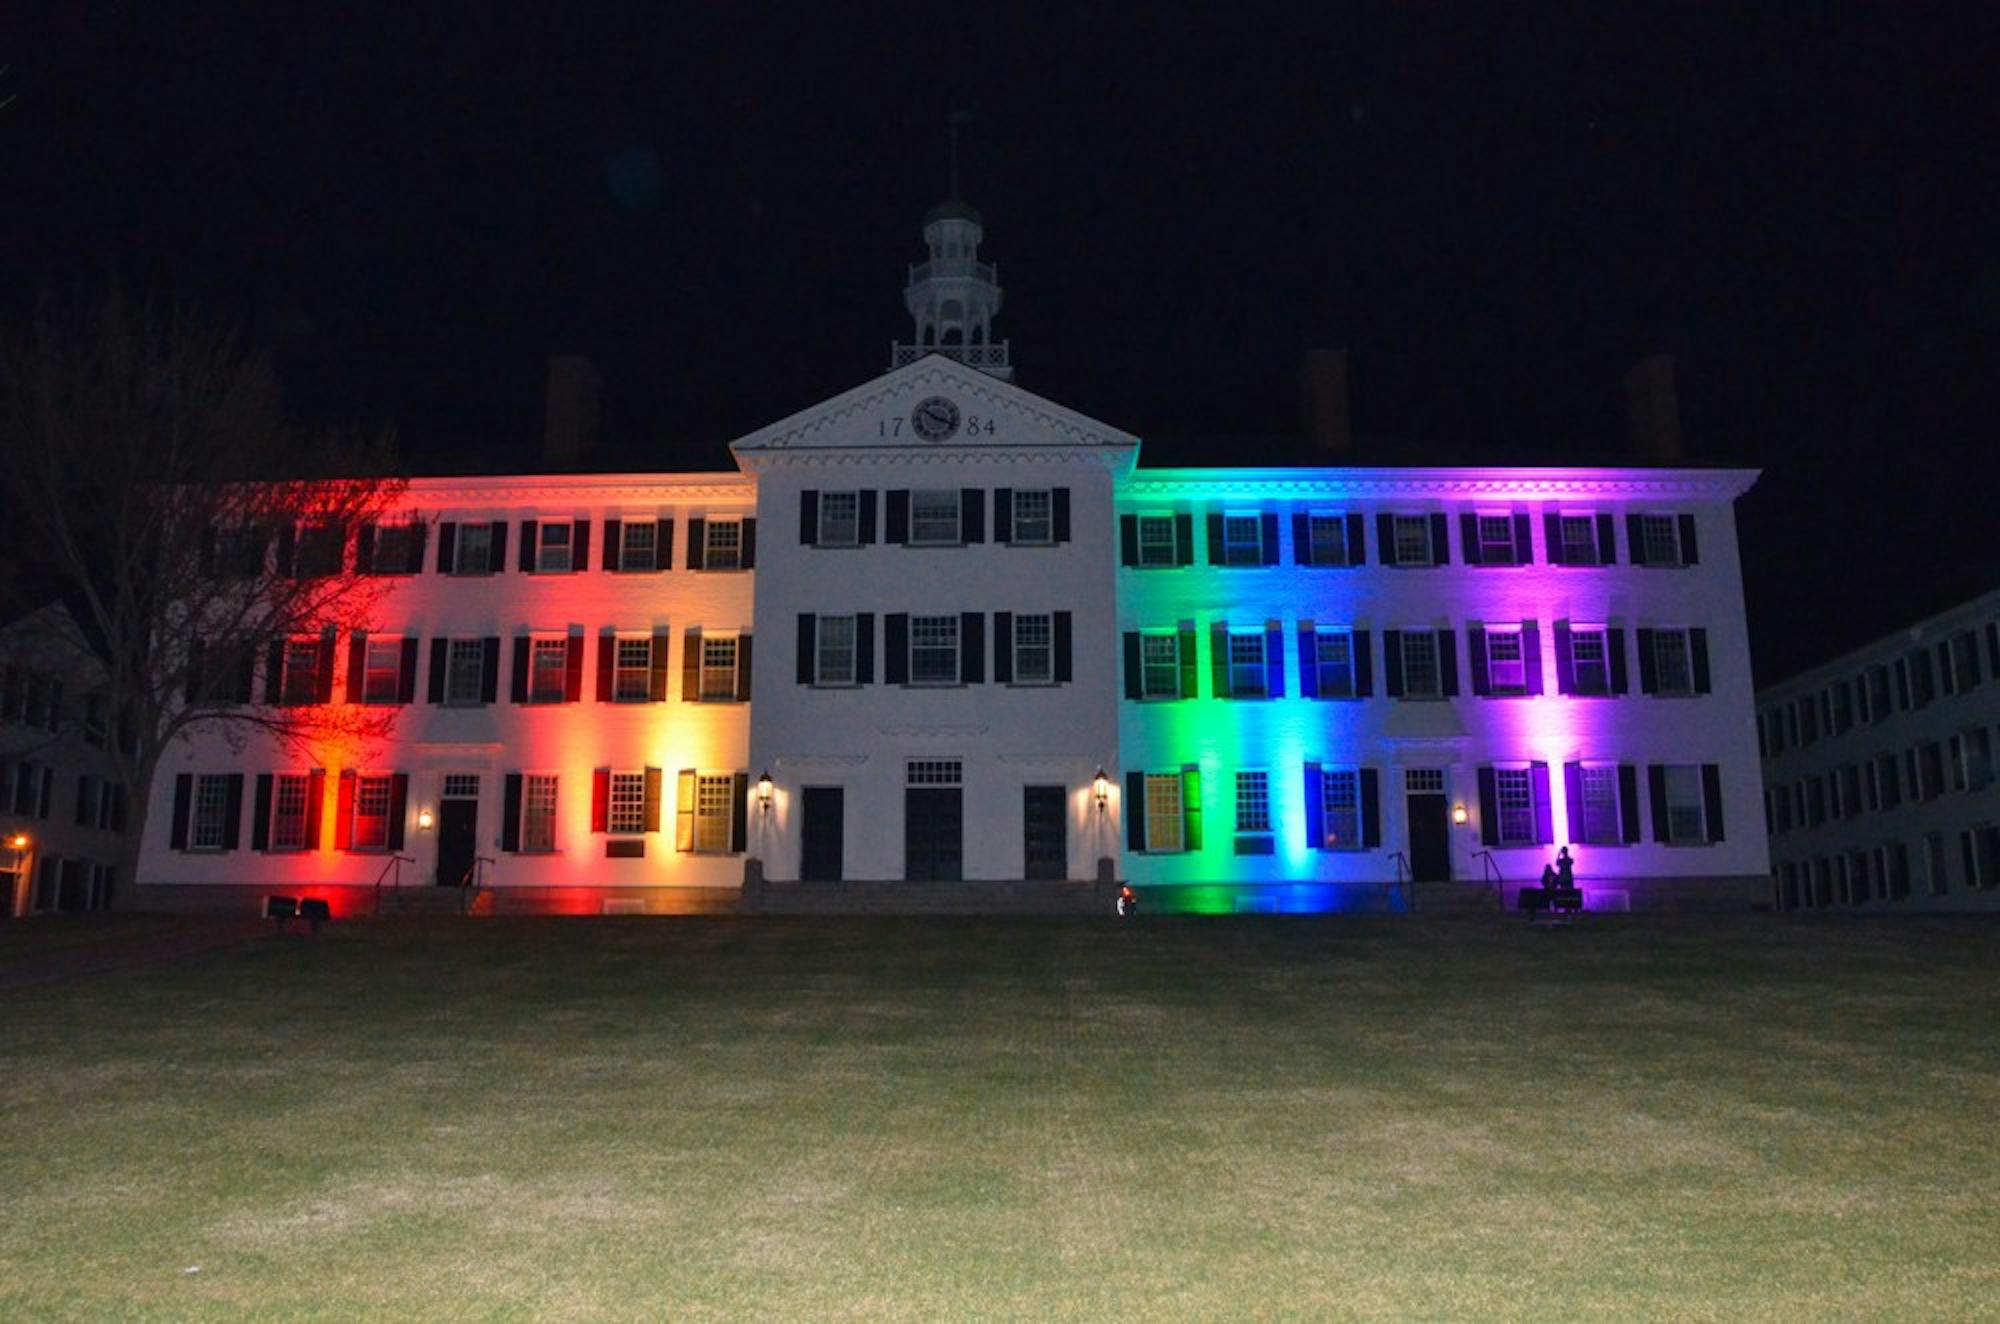 Dartmouth Hall lights up in rainbow in honor of PRIDE.